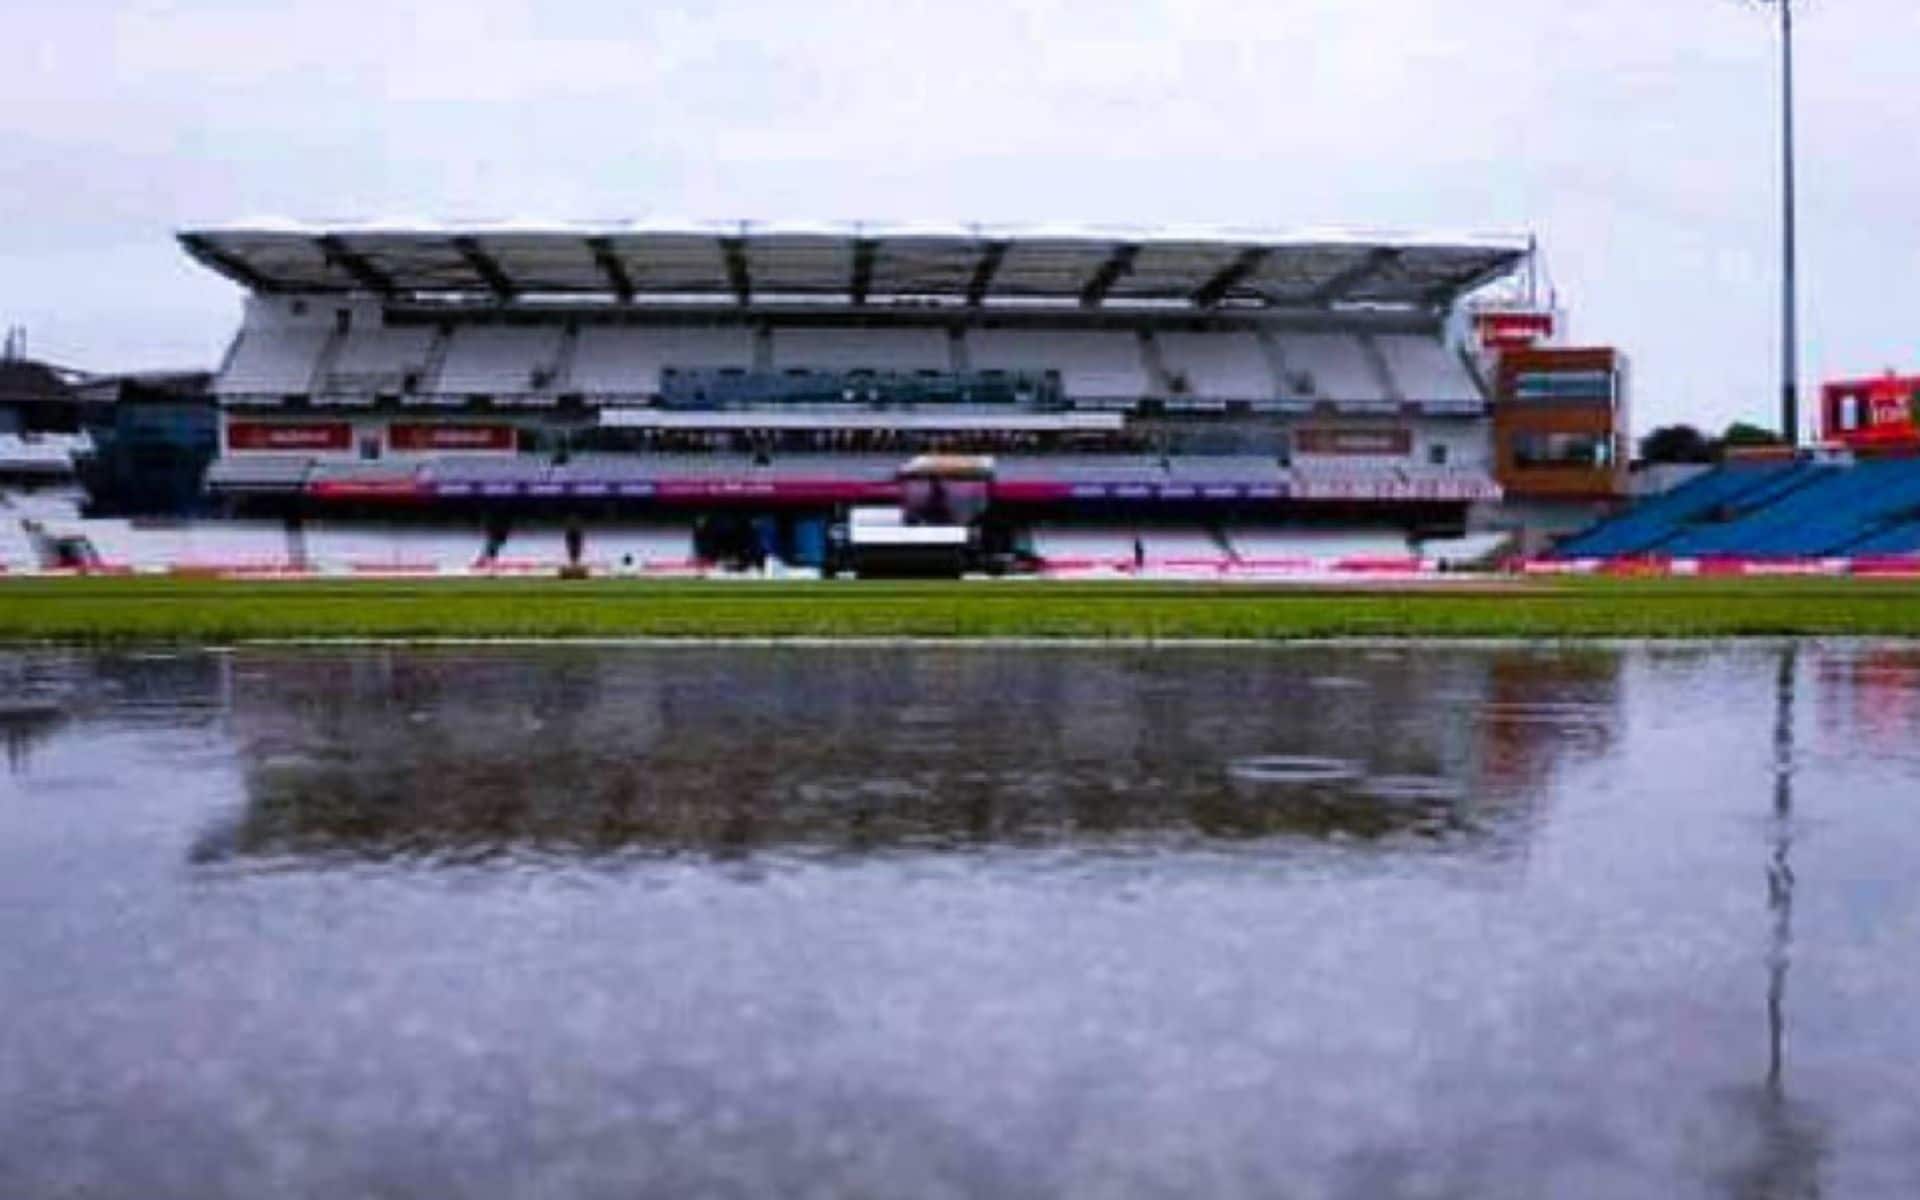 ENG Vs PAK 3rd T20I To Be Called Off? Check Latest Sophia Gardens Cardiff Weather